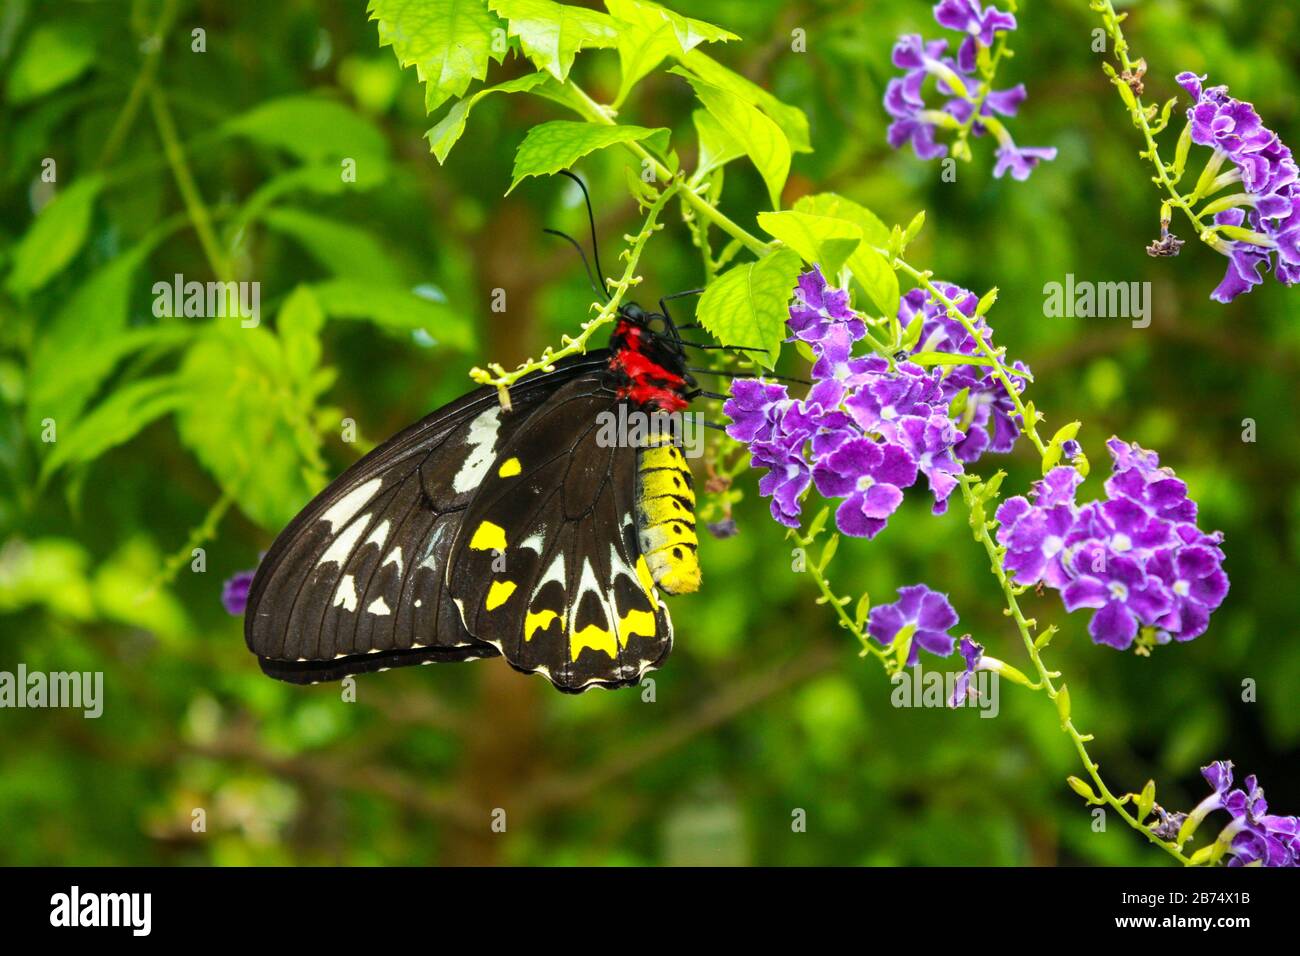 A black and yellow butterfly on a flower. High quality photo Stock Photo